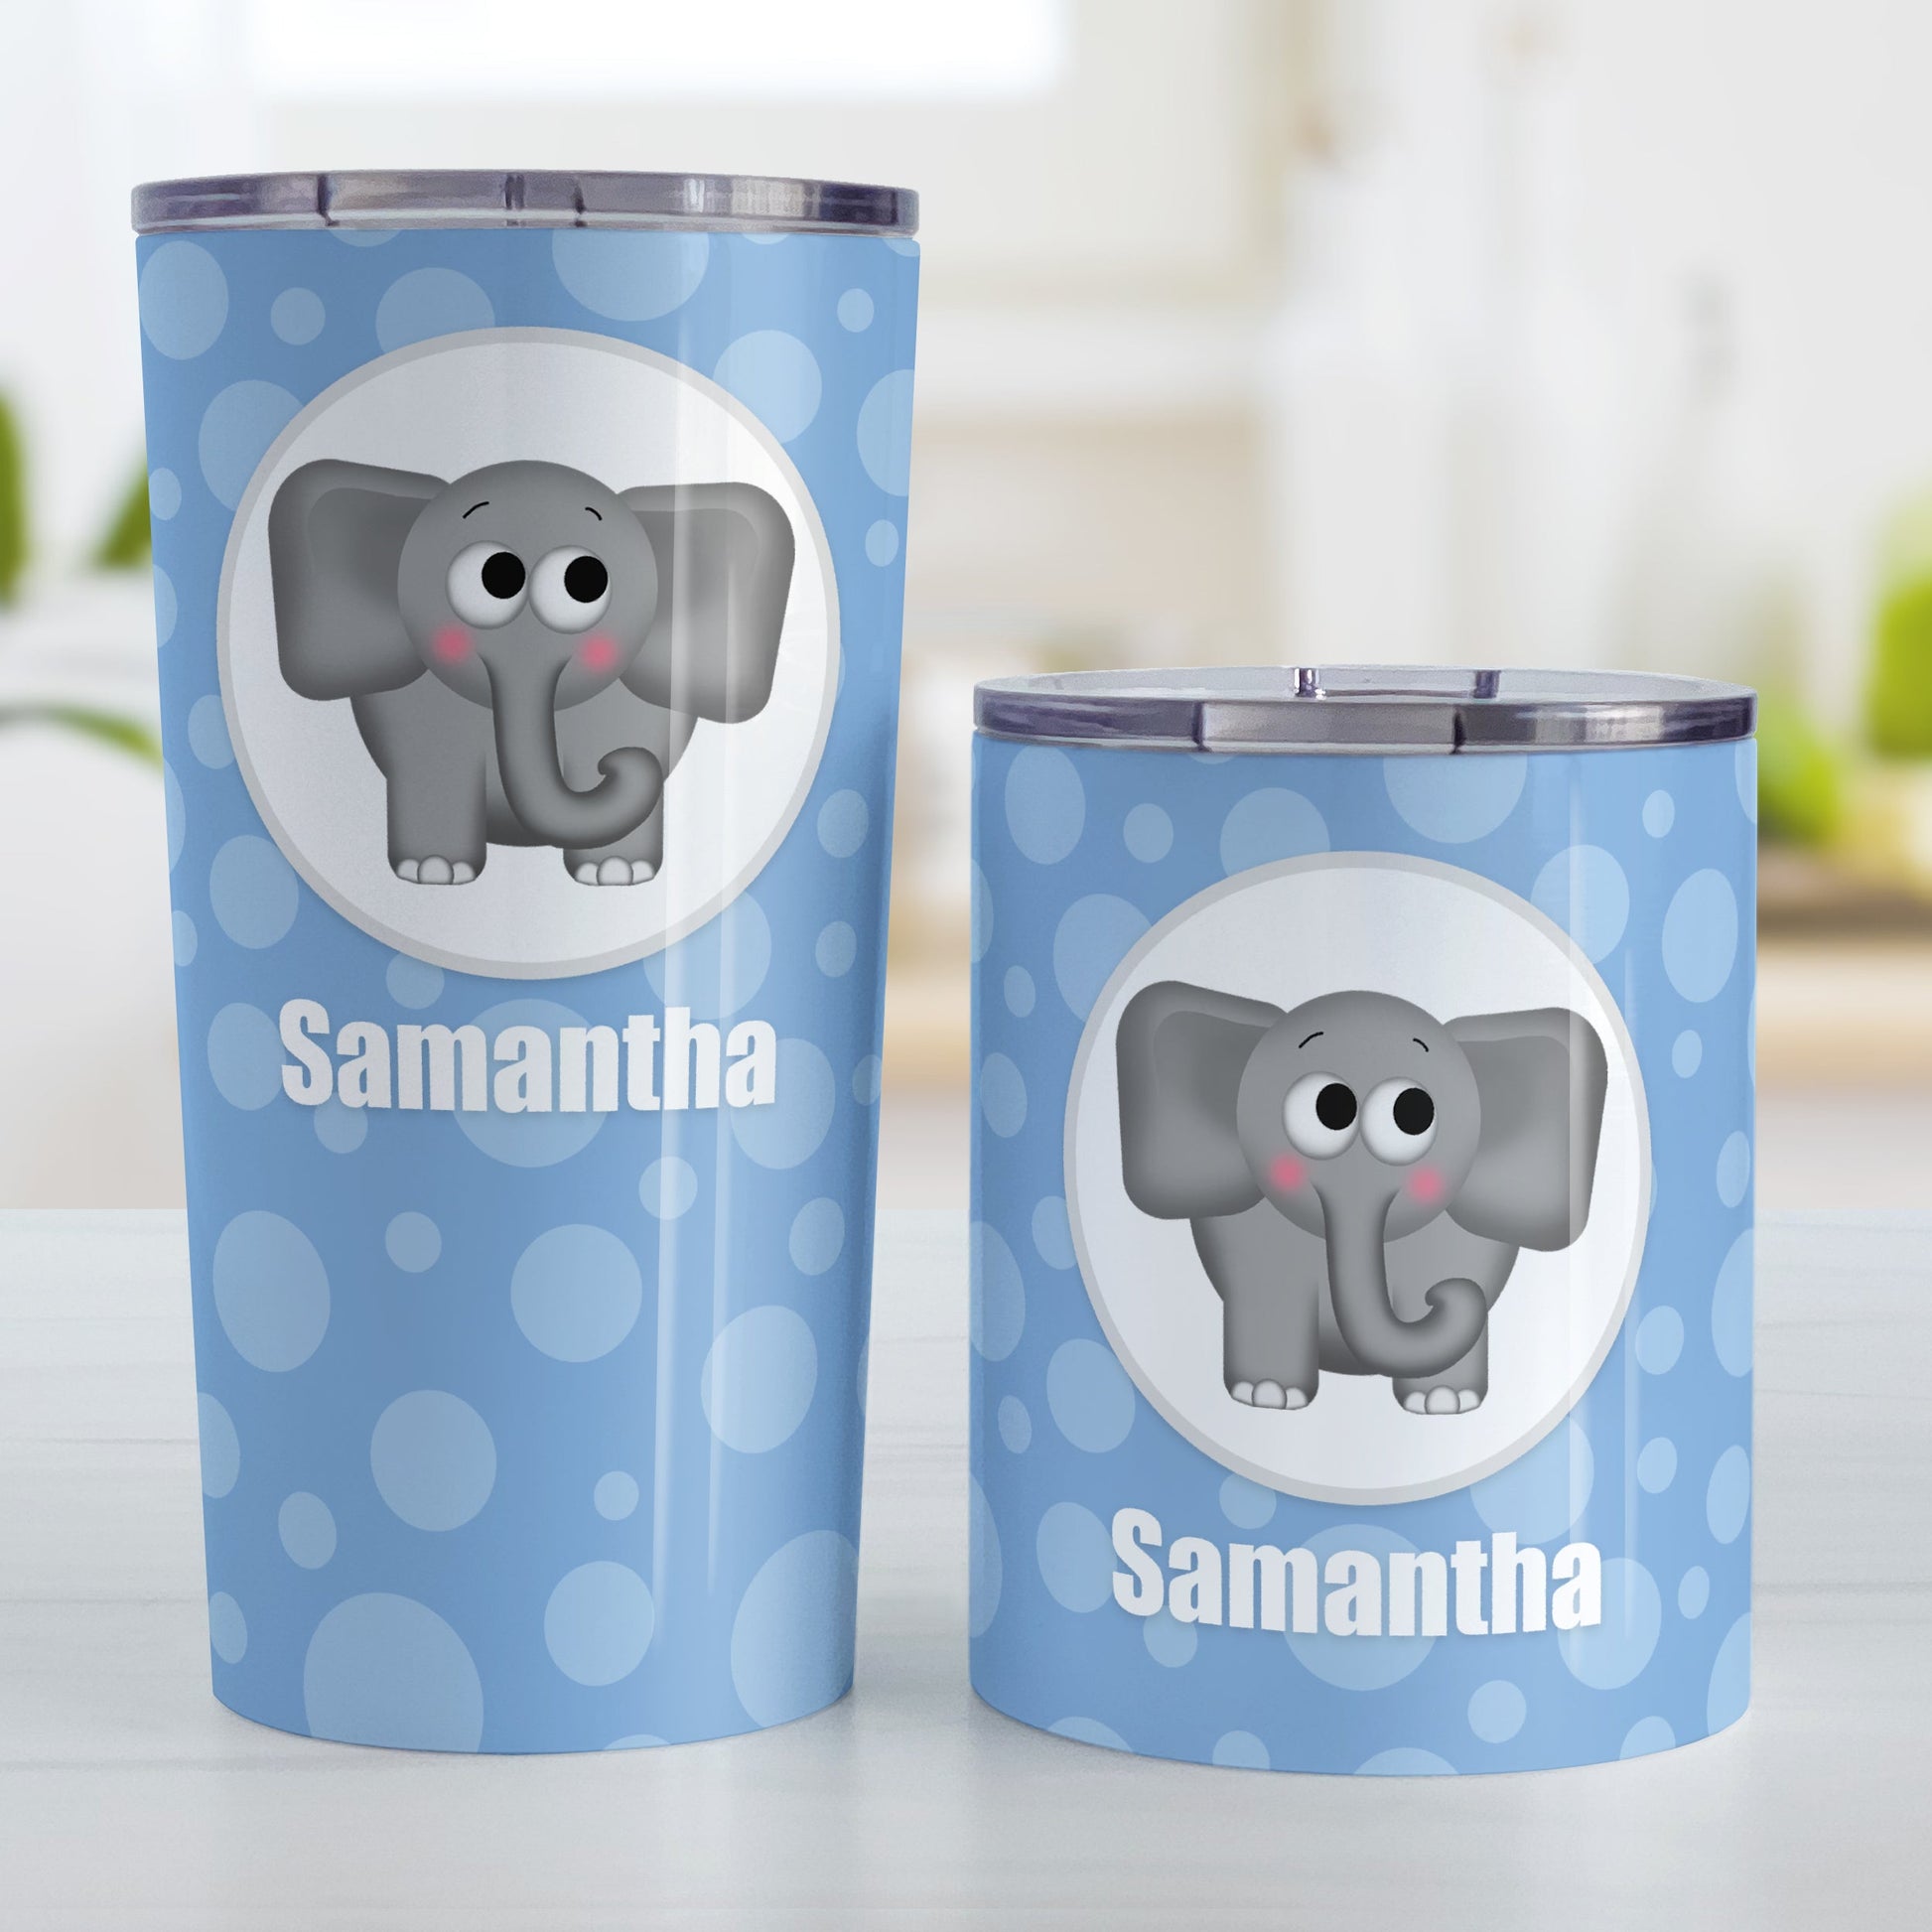 Cute Elephant Bubbly Blue Personalized Tumbler Cup (20oz and 10oz, stainless steel insulated) at Amy's Coffee Mugs